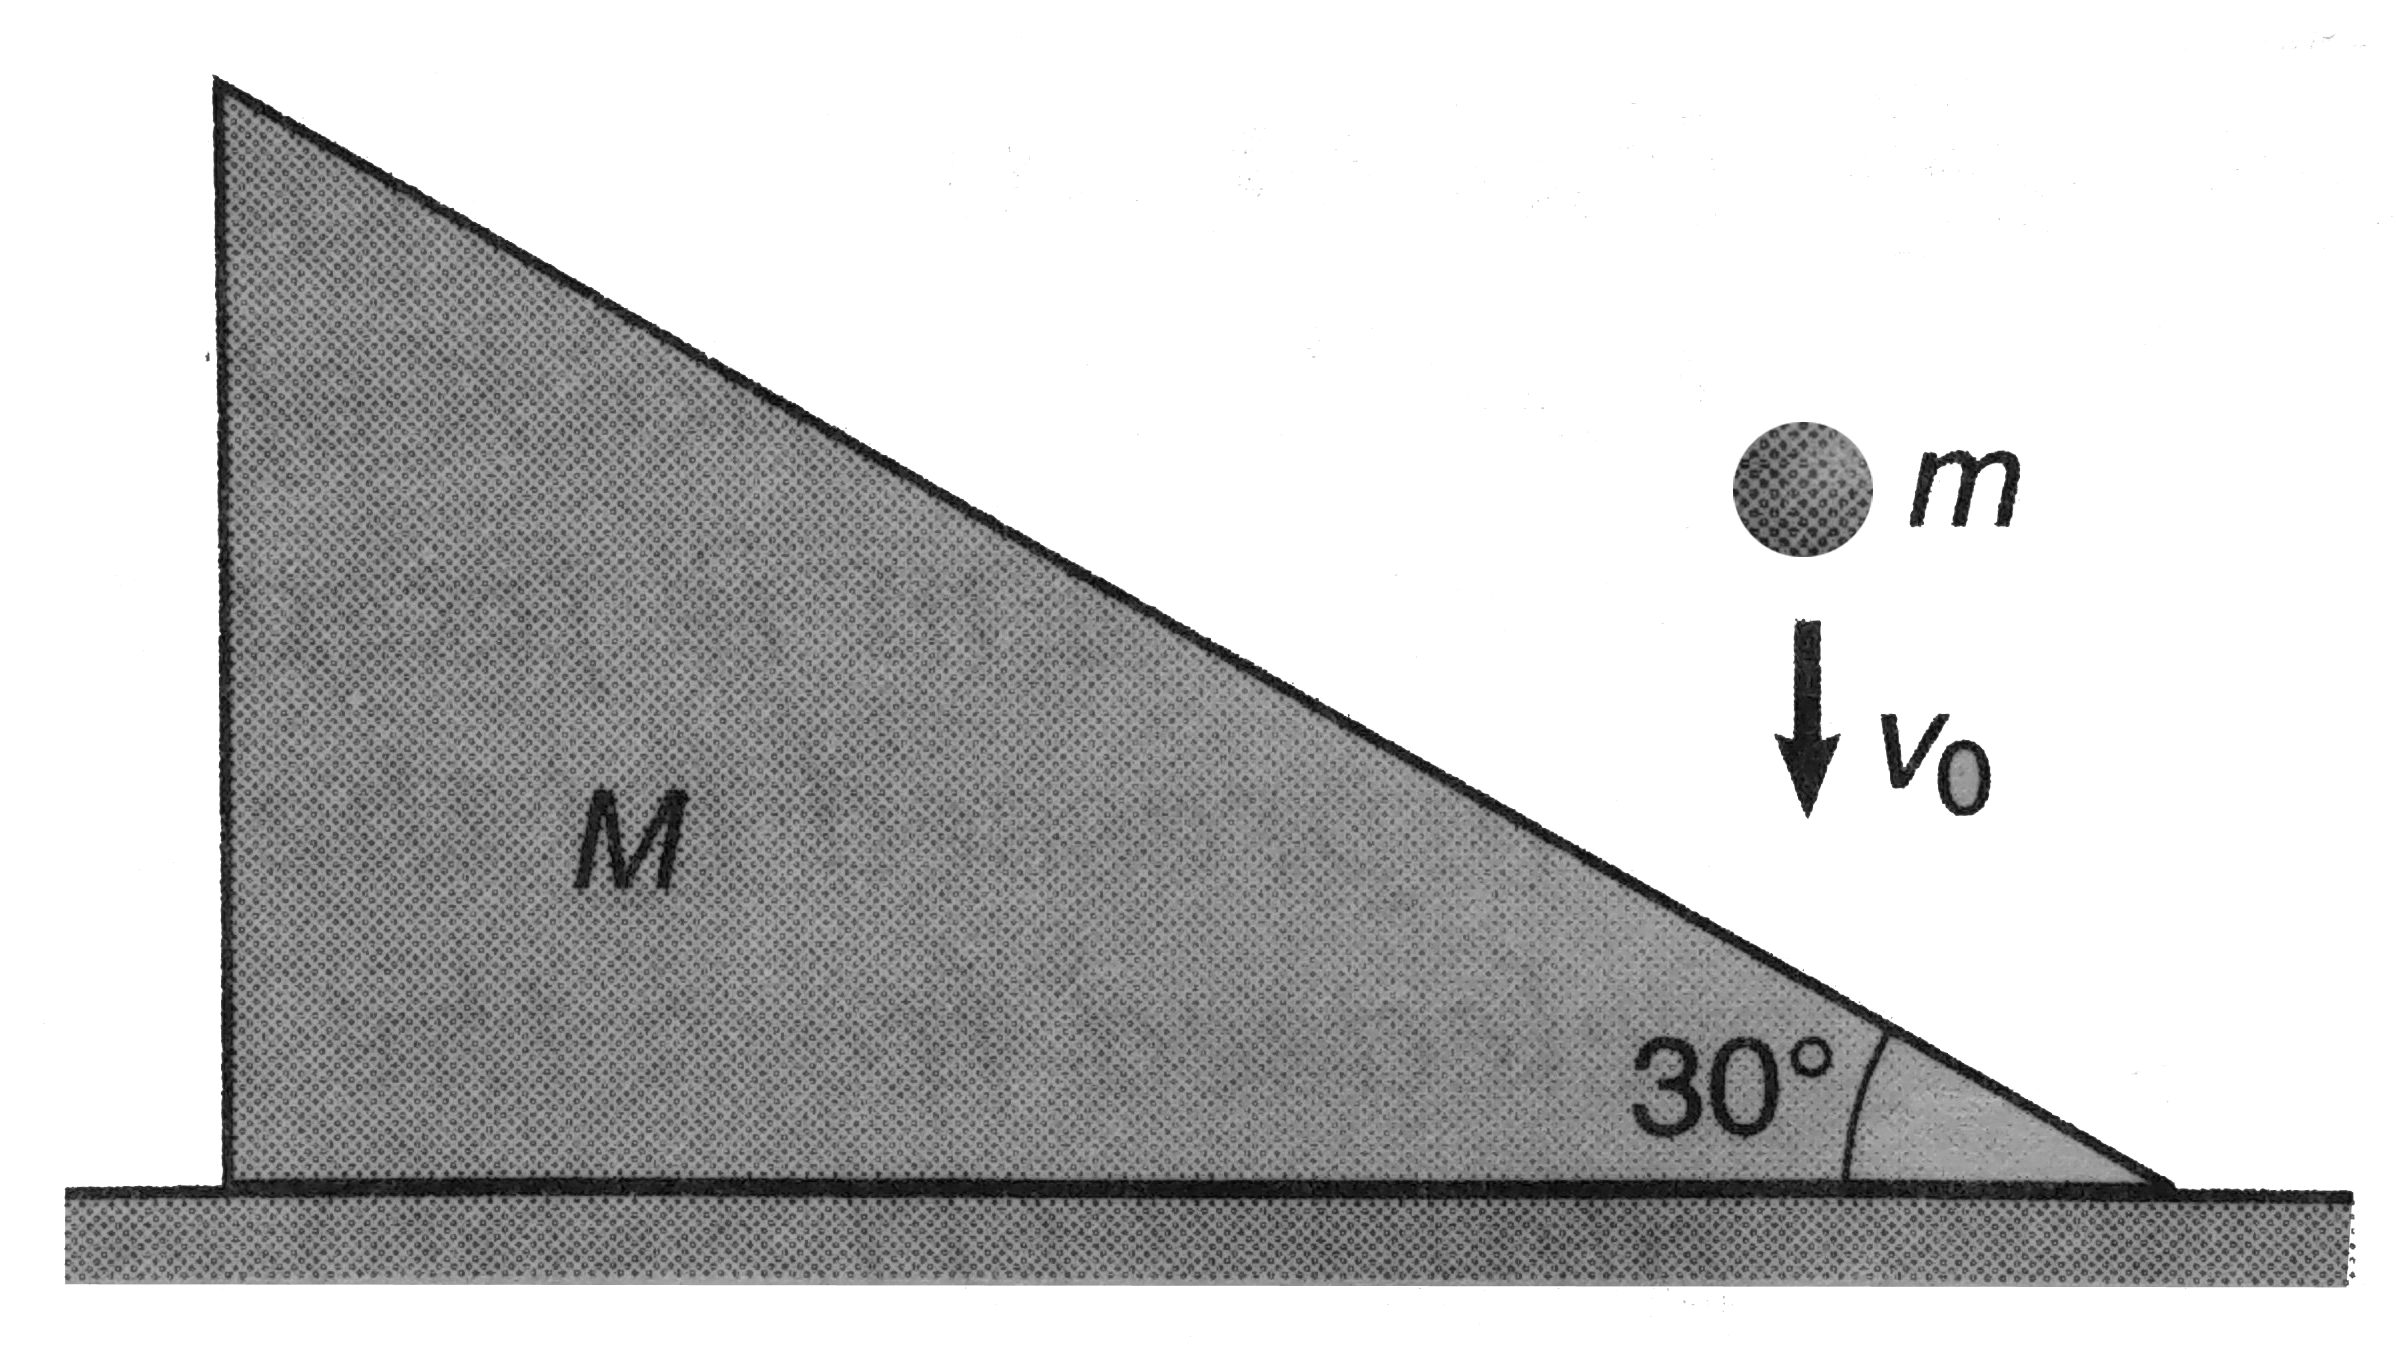 A ball of mass m=1kg falling vertically with a velocity v0=2m//s strikes a wedge of mass M=2kg kept on a smooth, horizontal surface as shown in figure. If impulse between ball and wedge during collision is J. Then make two equations which relate J with velocity components of wedge and ball. Also find impulse on wedges from ground during impact.